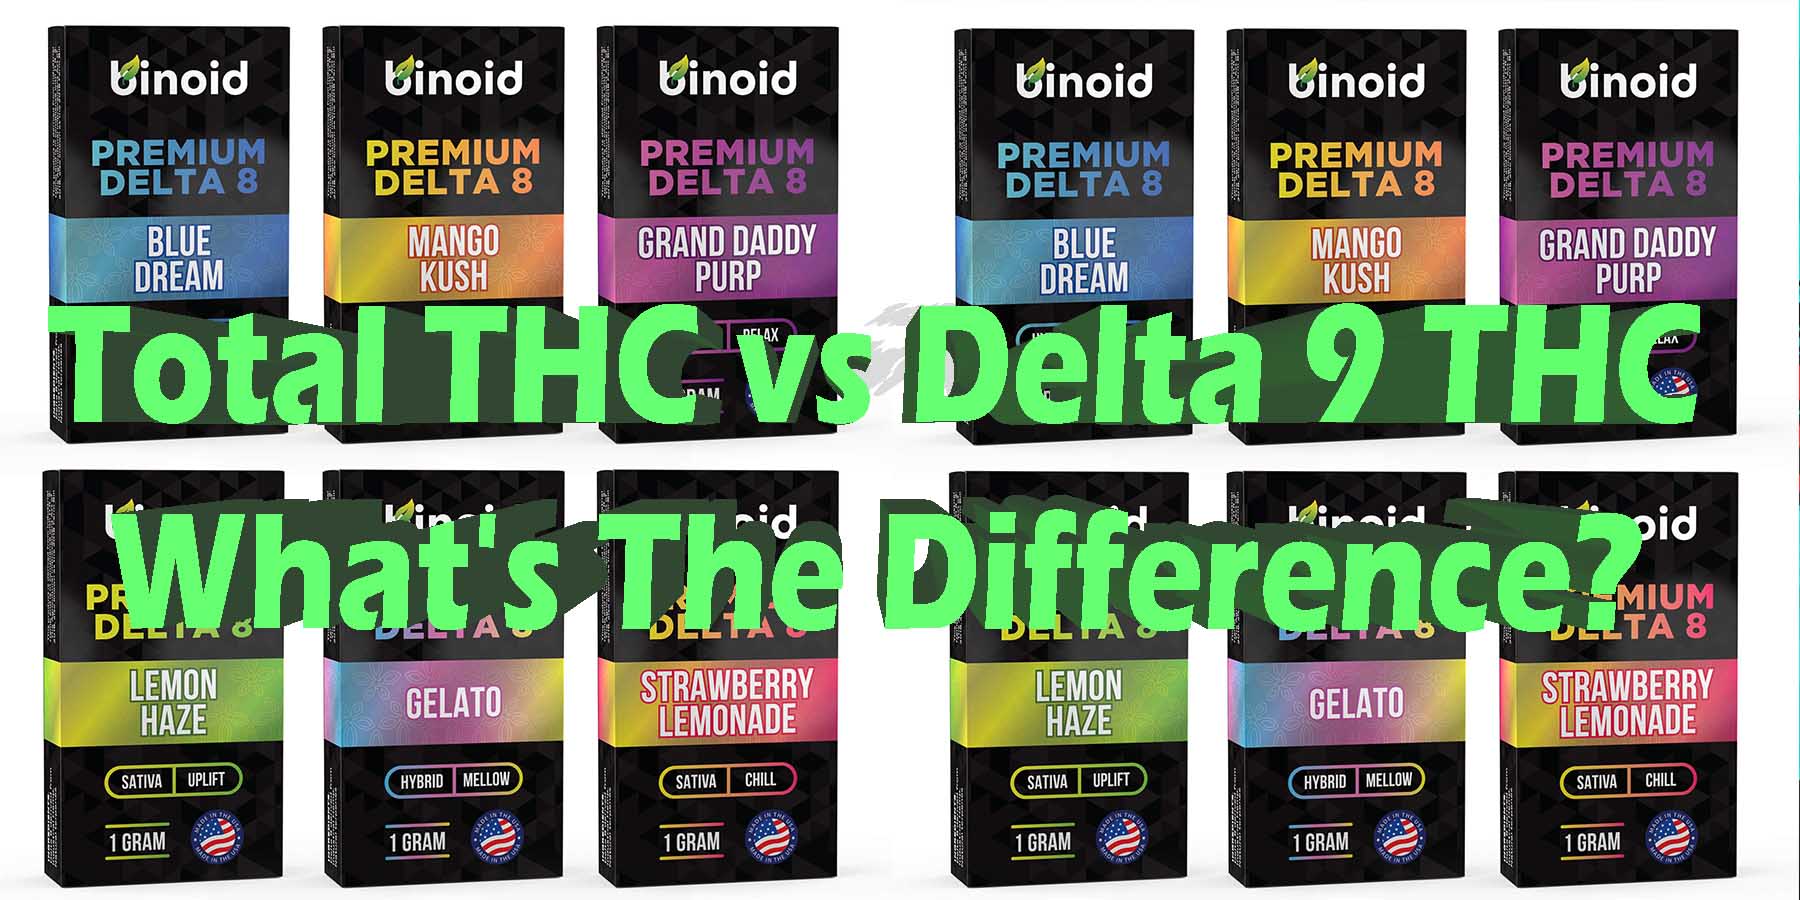 Total THC vs Delta 9 THC Whats The Difference Which Is Better HowToGetNearMe BestPlace LowestPrice Coupon Discount For Smoking Best High Binoid.